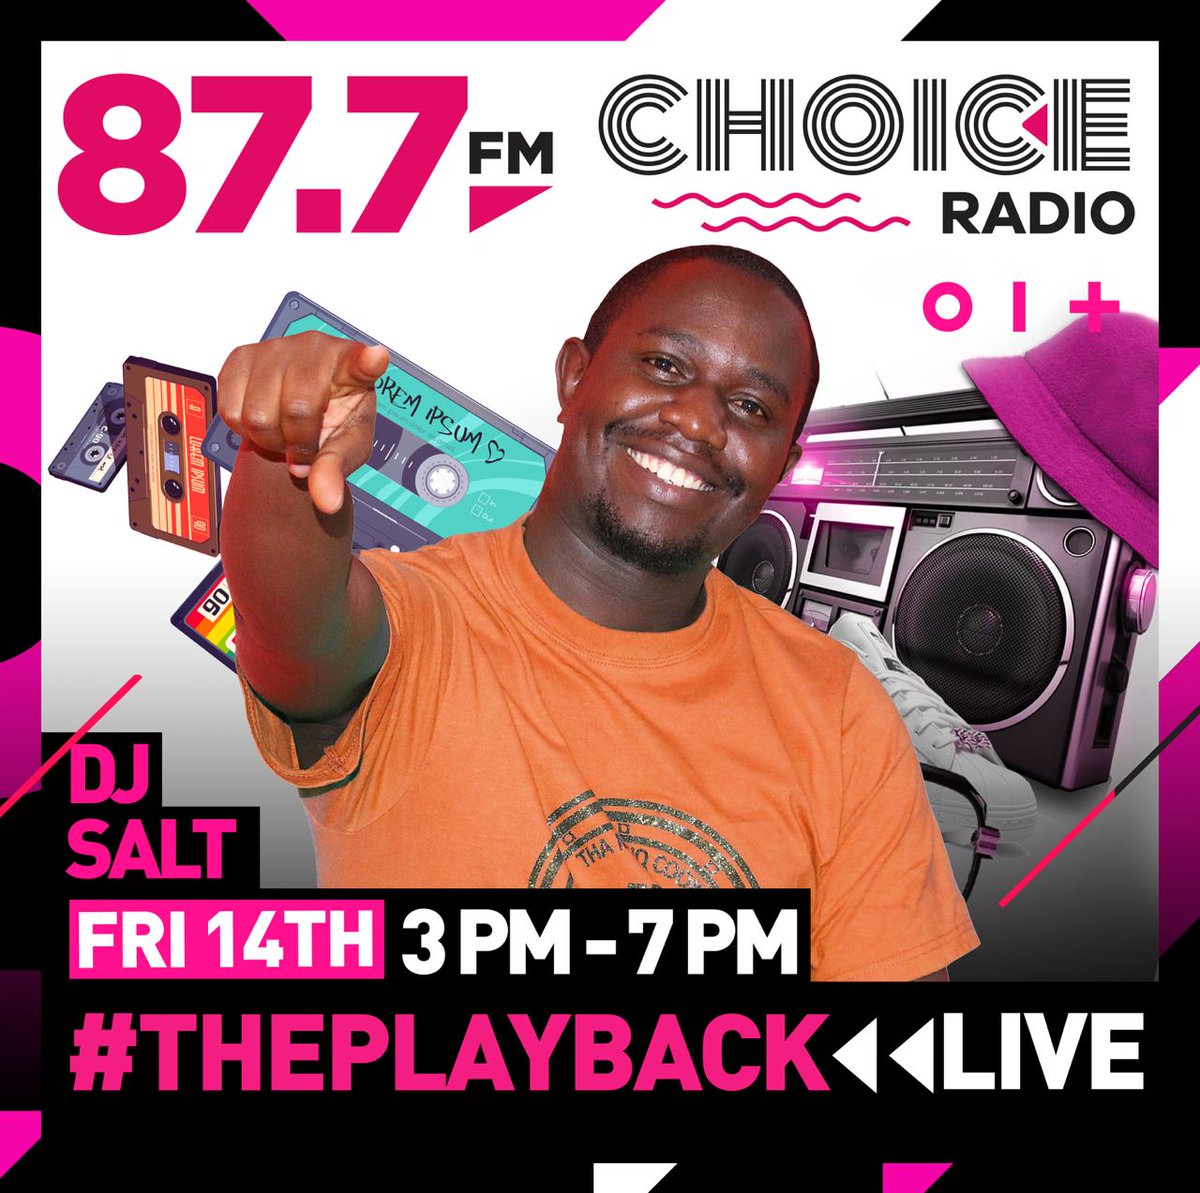 🔥 Salt De DJ is BACK on the Playback radio show by popular demand! 🙌🏽Get ready to groove to the best old-school tracks as we take over the airwaves this afternoon from 3pm only on Choice Radio. 🎶📻 #SaltDeDJ #PlaybackRadio #OldSchoolMusic #TuneInNow #DontMissOut